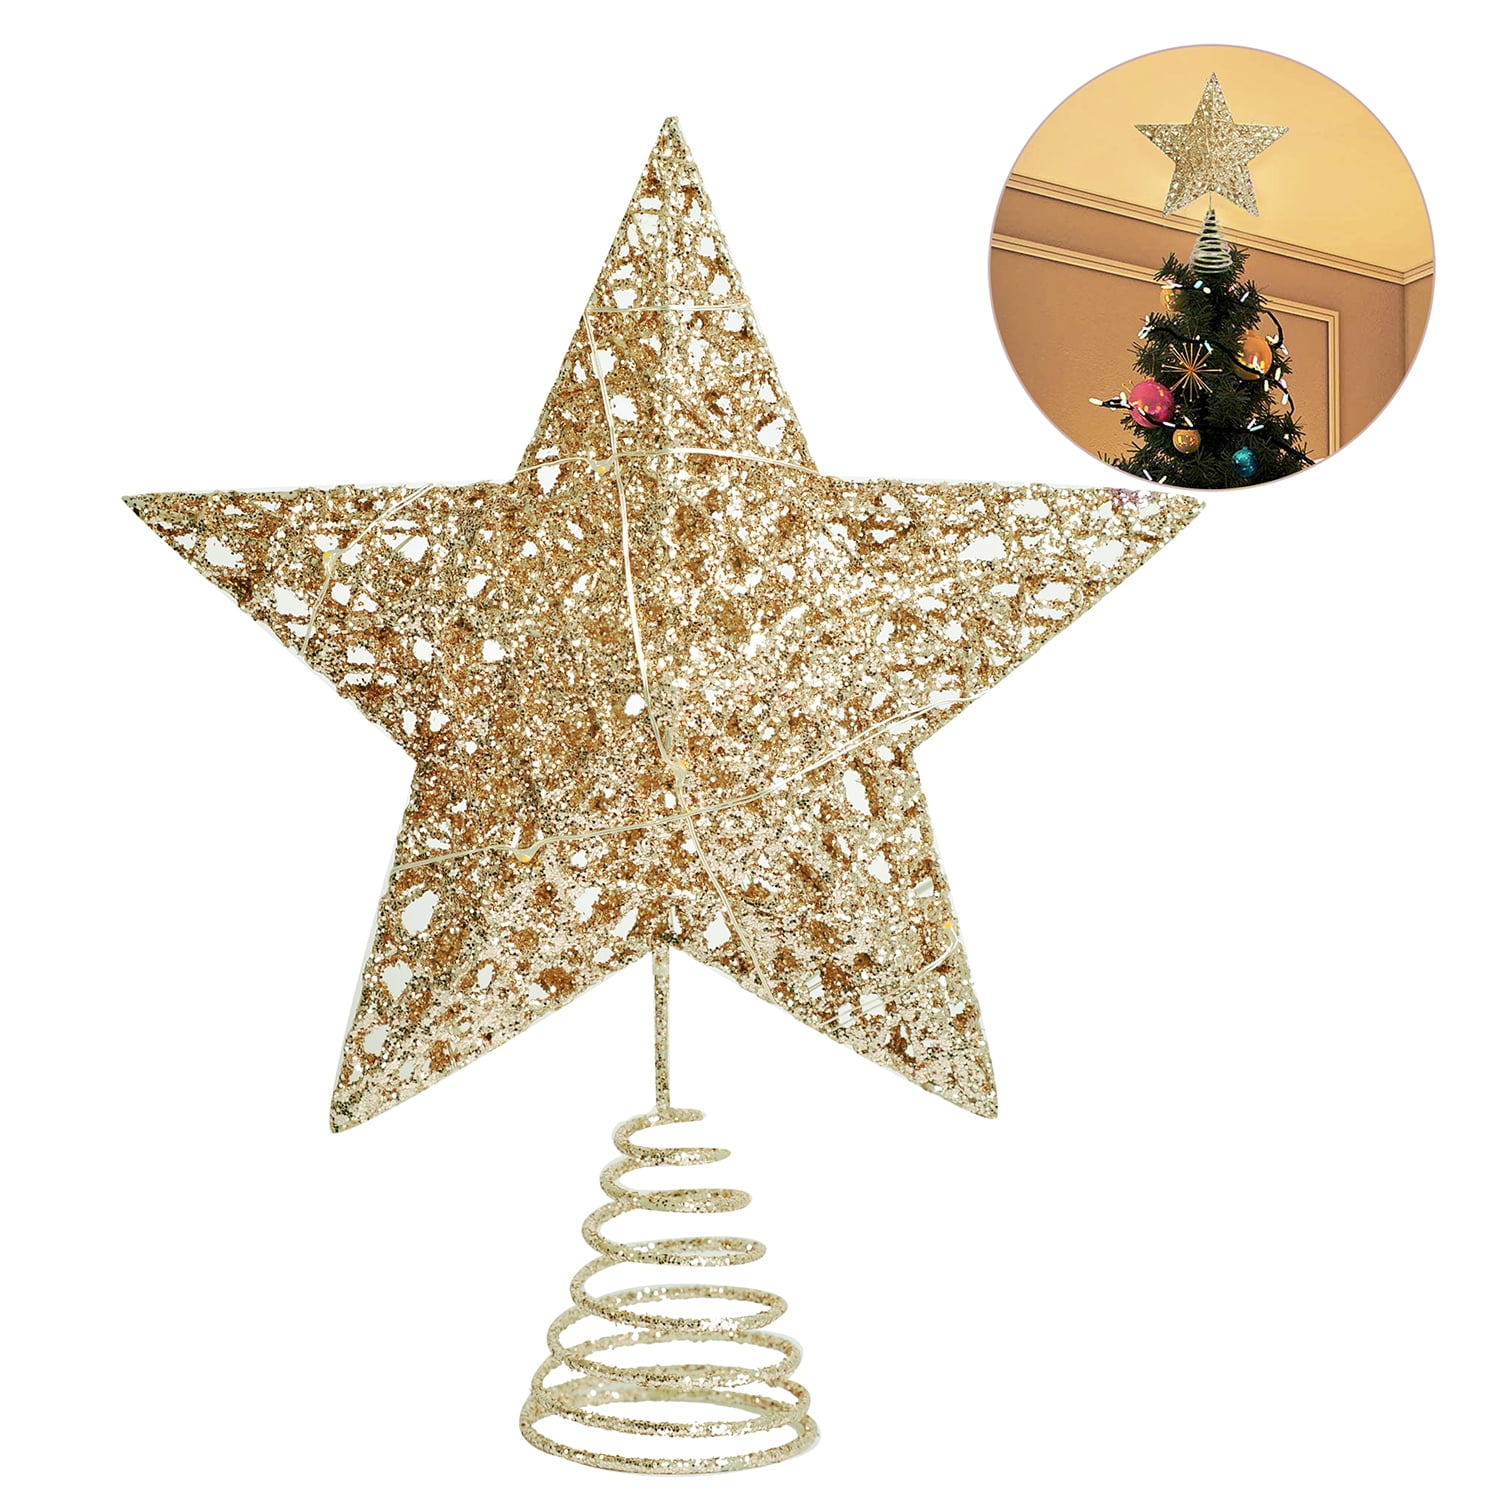 Aoriher 10 Inch Glittered Christmas Tree Topper Hollow Christmas Star Treetop for Christmas Ornaments and Holiday Seasonal Decor Gold